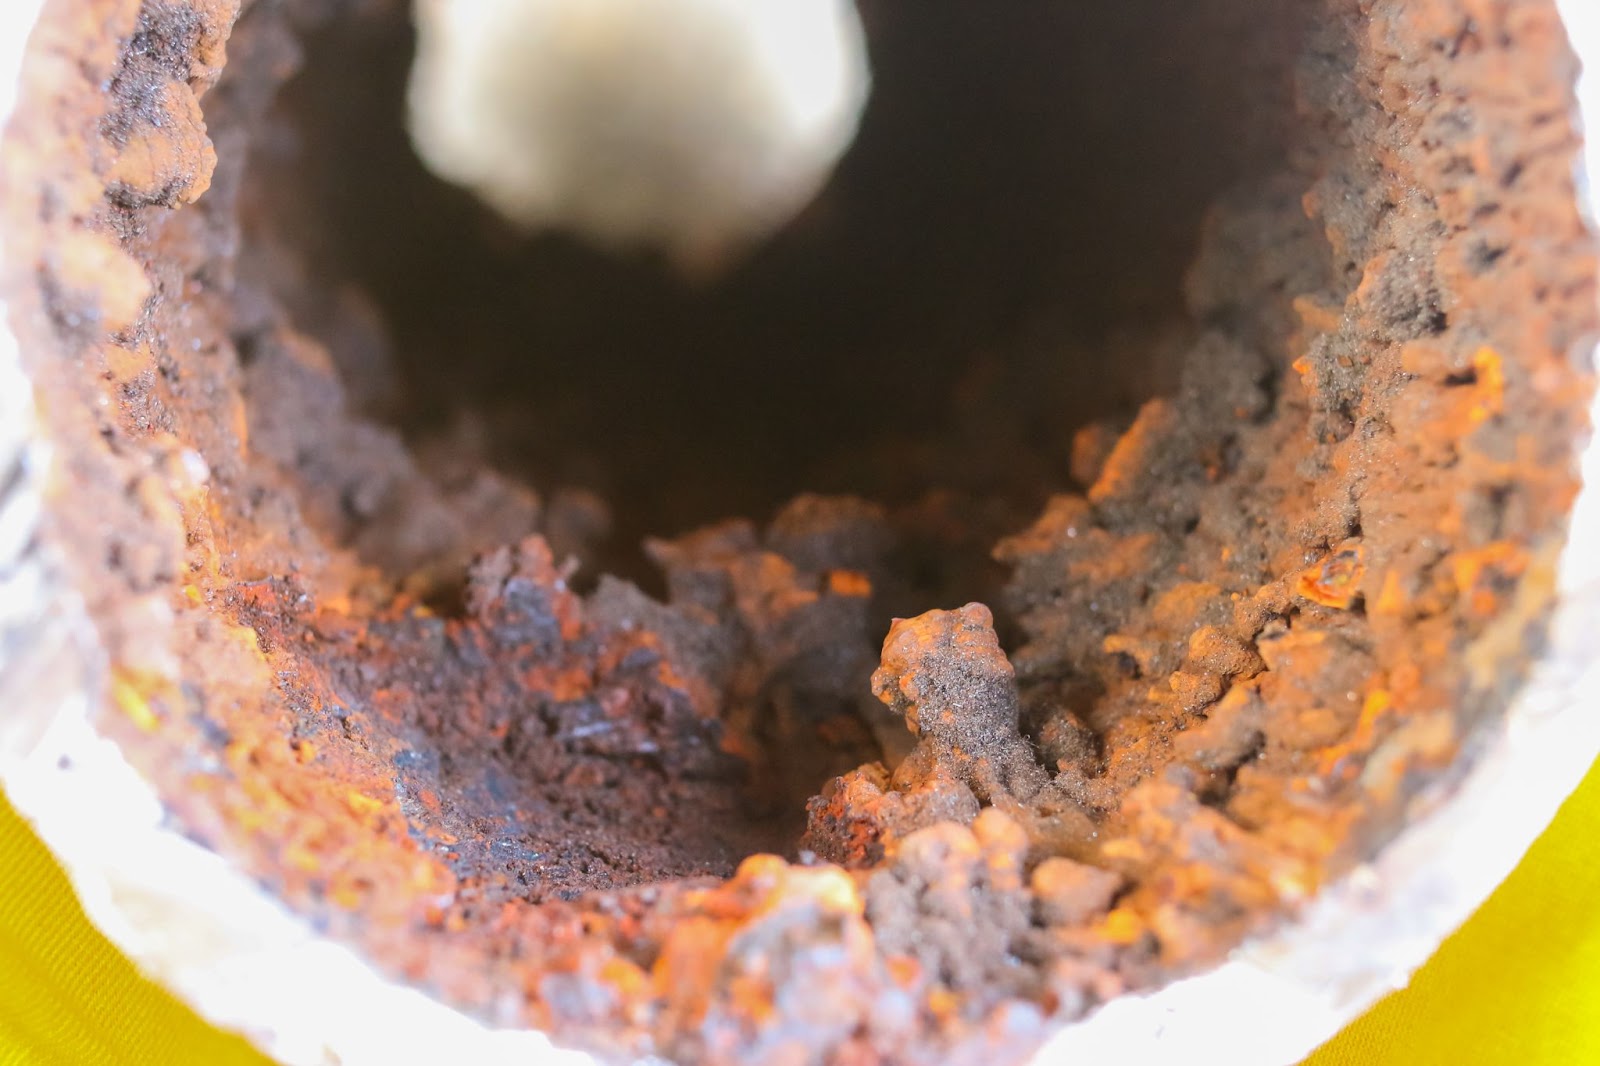 Tuberculation in a corroded iron pipe.